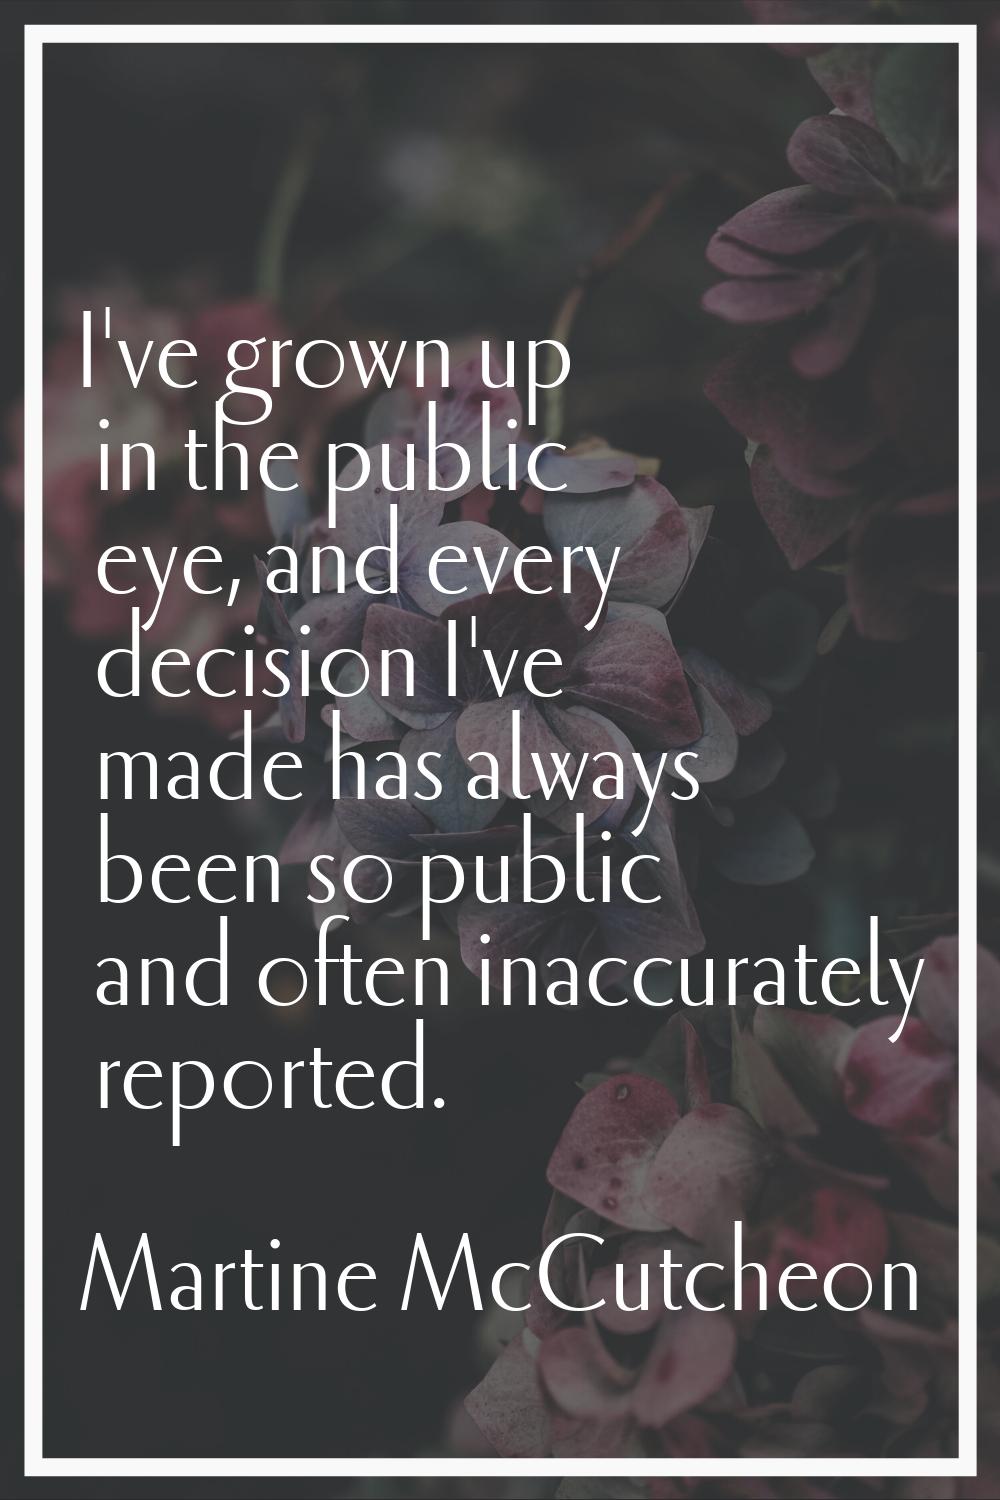 I've grown up in the public eye, and every decision I've made has always been so public and often i